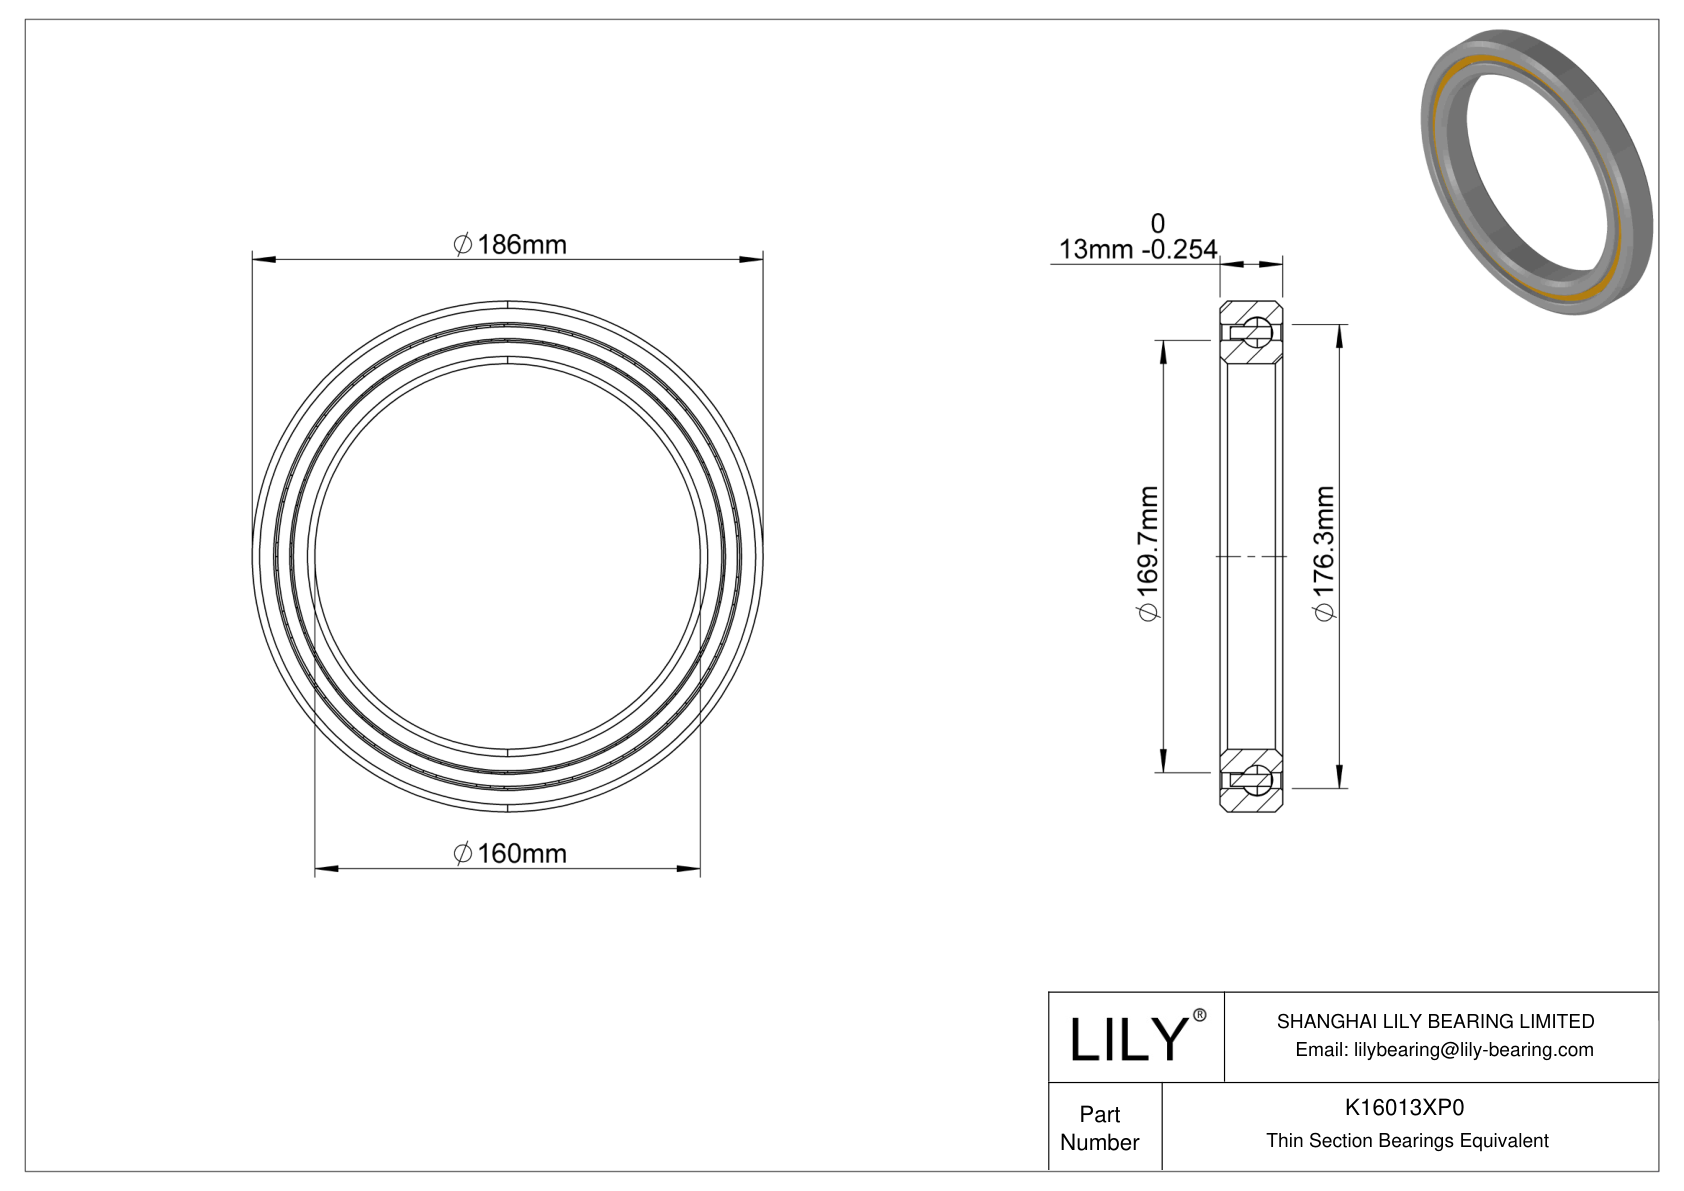 K16013XP0 Constant Section (CS) Bearings cad drawing